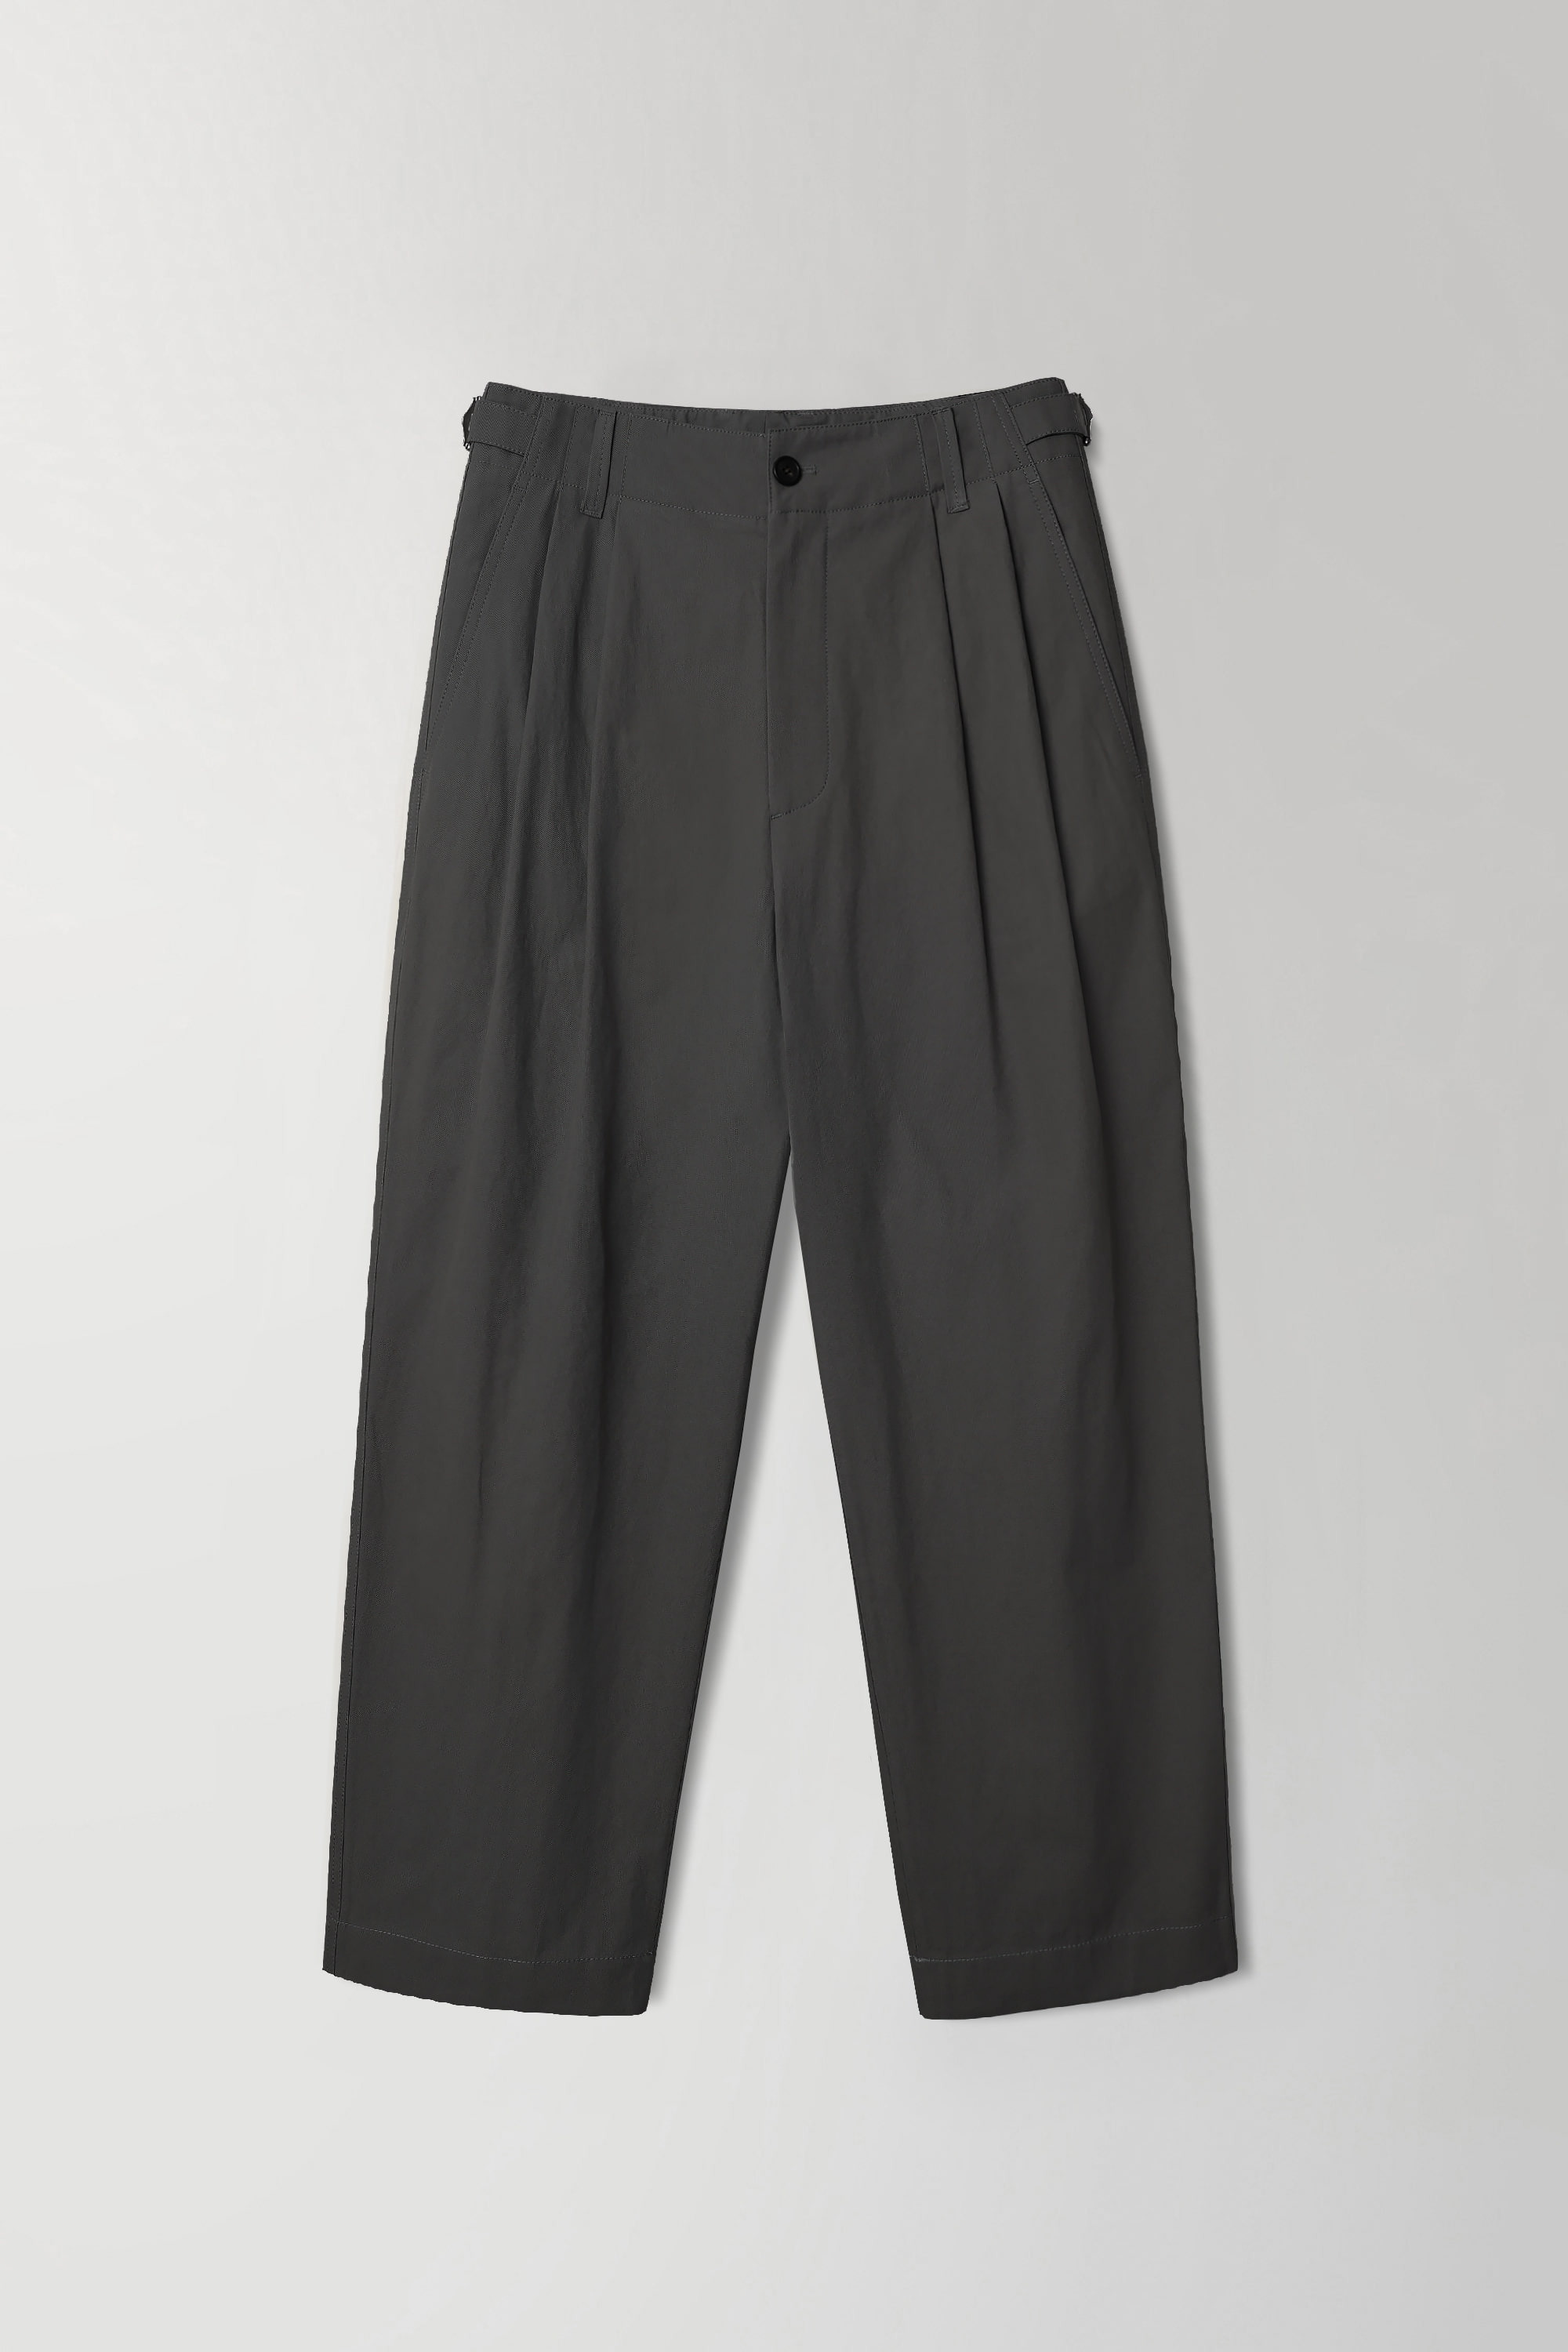 TRAVELLER CHINO PANTS (TYPE2) - ANTHRACITE